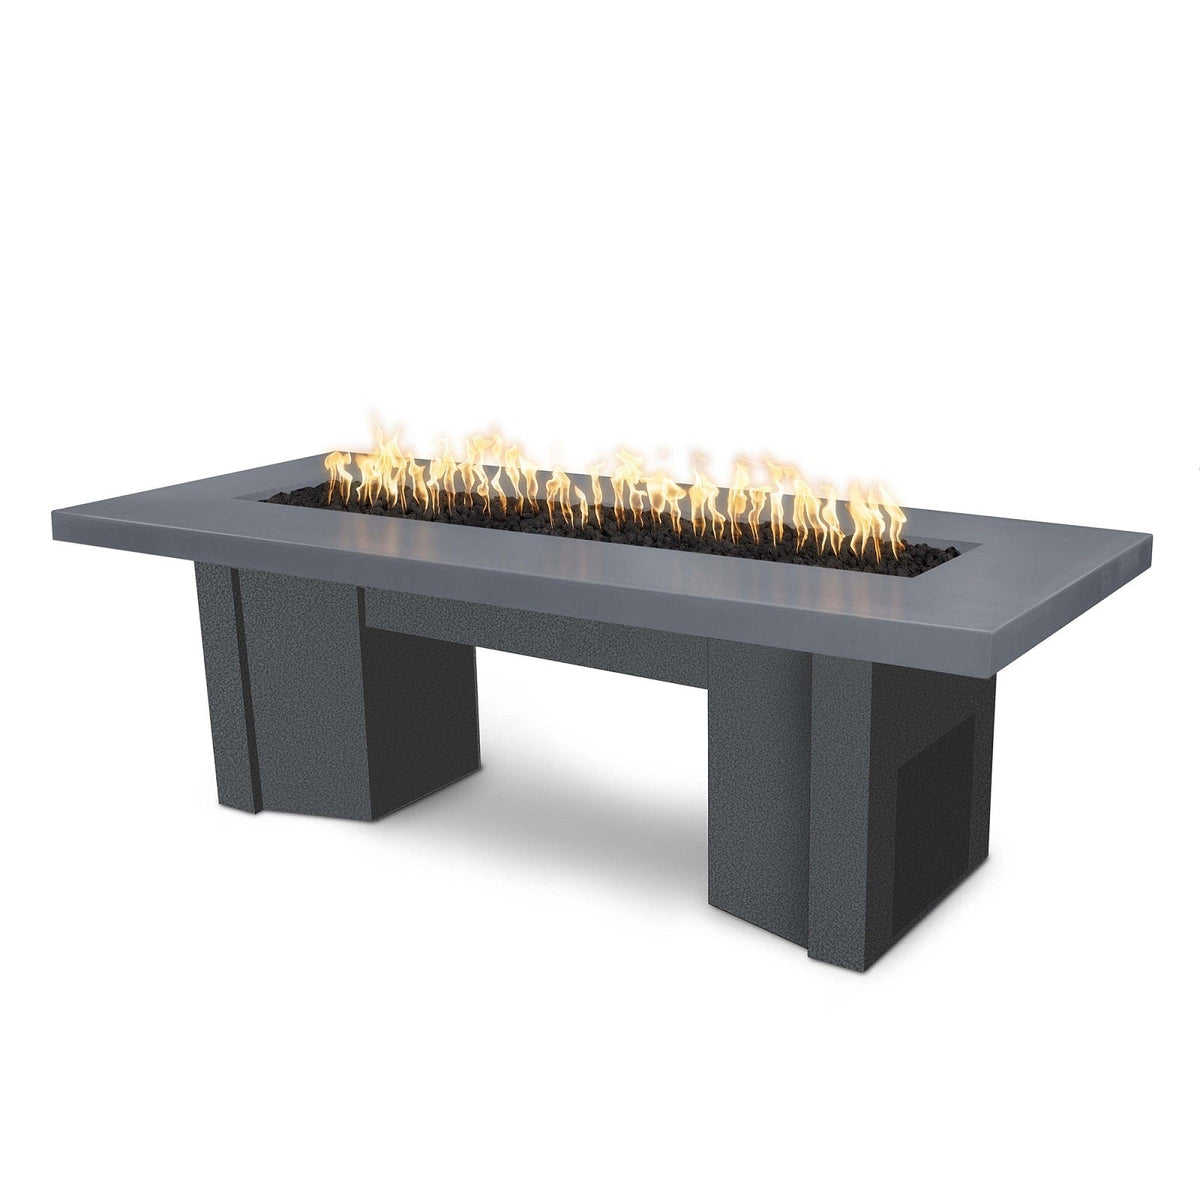 The Outdoor Plus Fire Features Gray (-GRY) / Silver Vein Powder Coated Steel (-SLV) The Outdoor Plus 60&quot; Alameda Fire Table Smooth Concrete in Liquid Propane - Match Lit / OPT-ALMGFRC60-LP